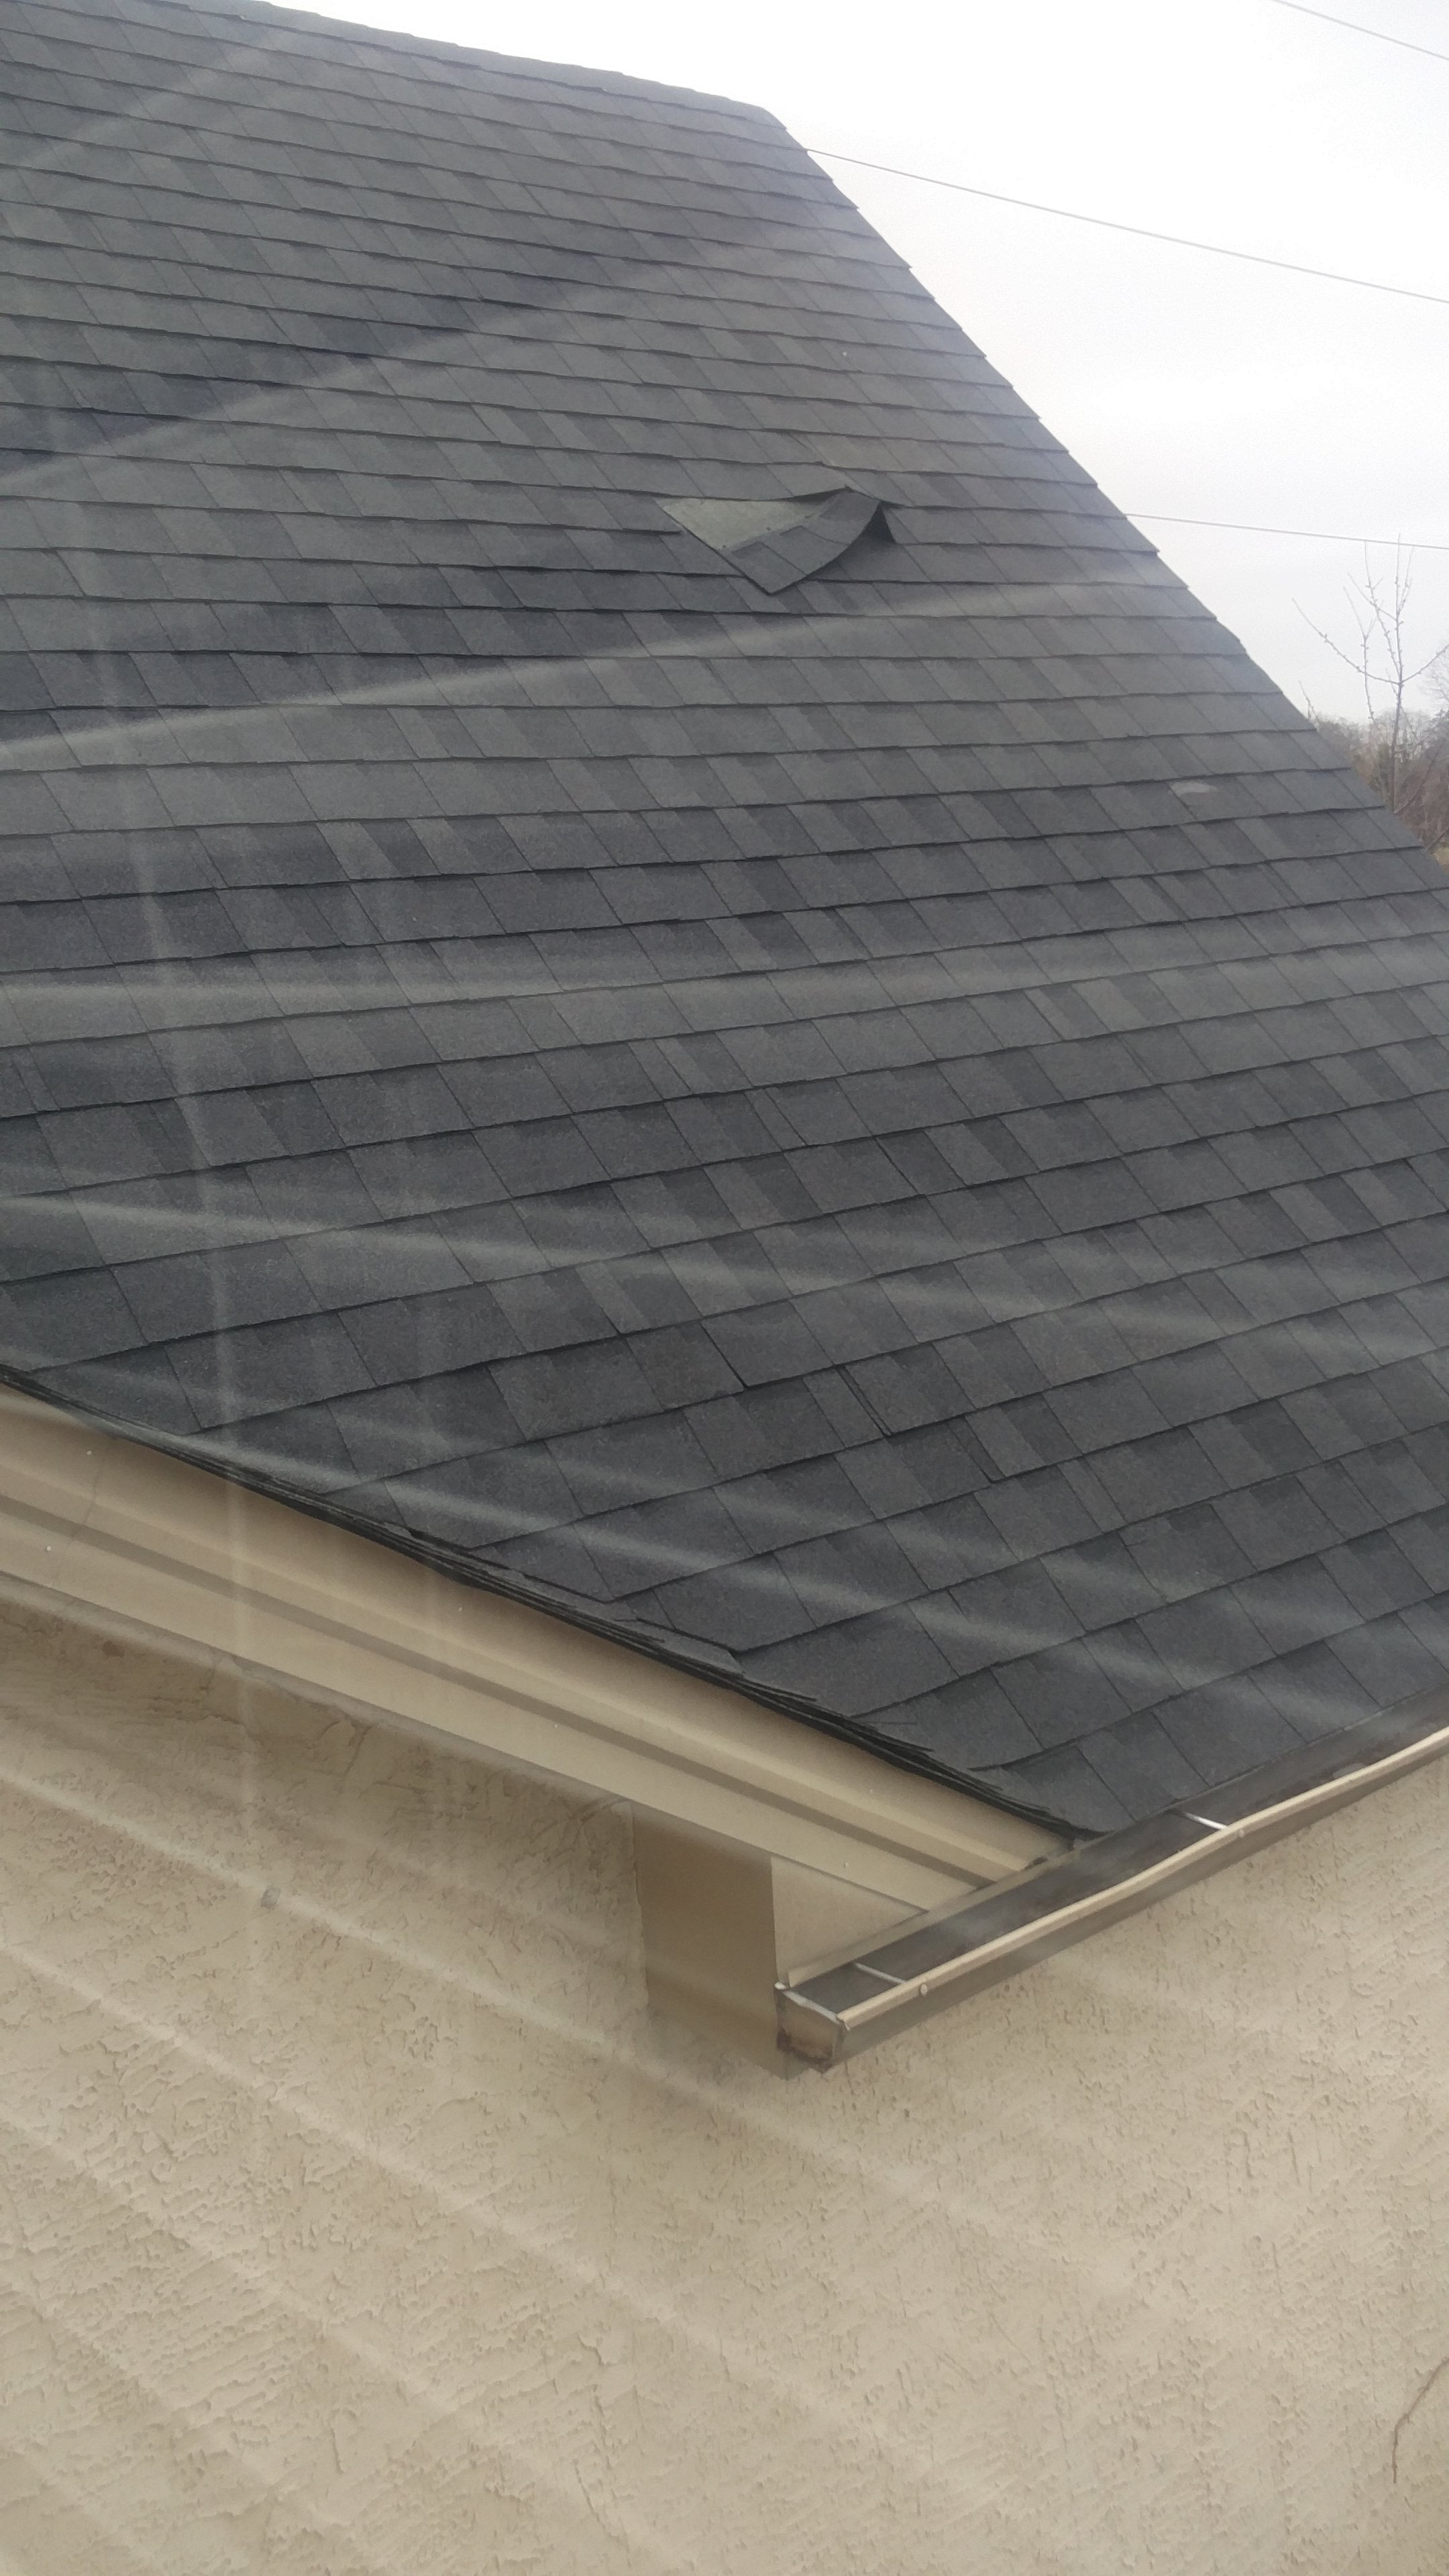 Roof shingles falling off after only a month old